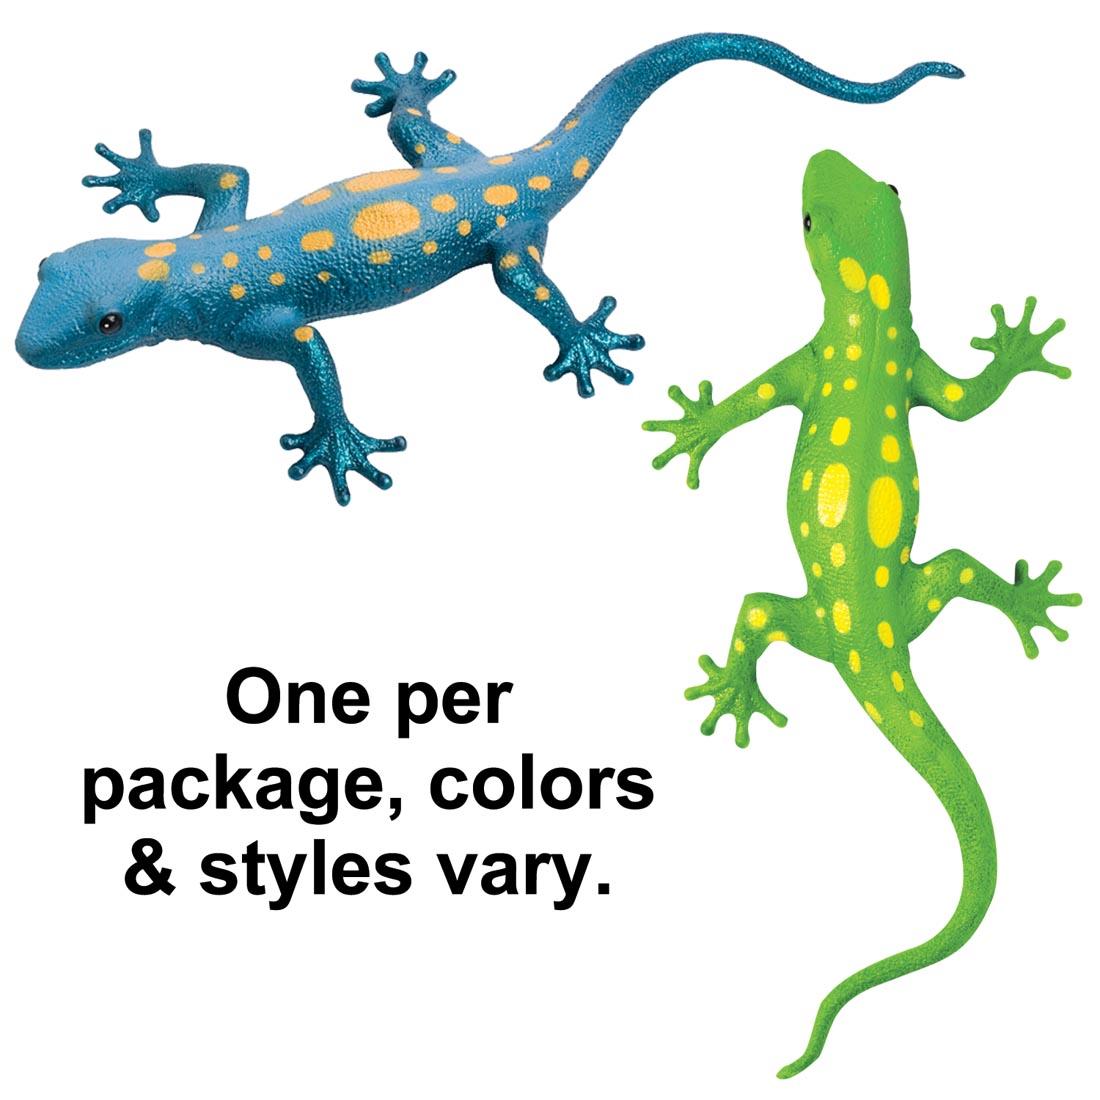 Two Lizard Squishimals with the text One per package, colors & styles vary